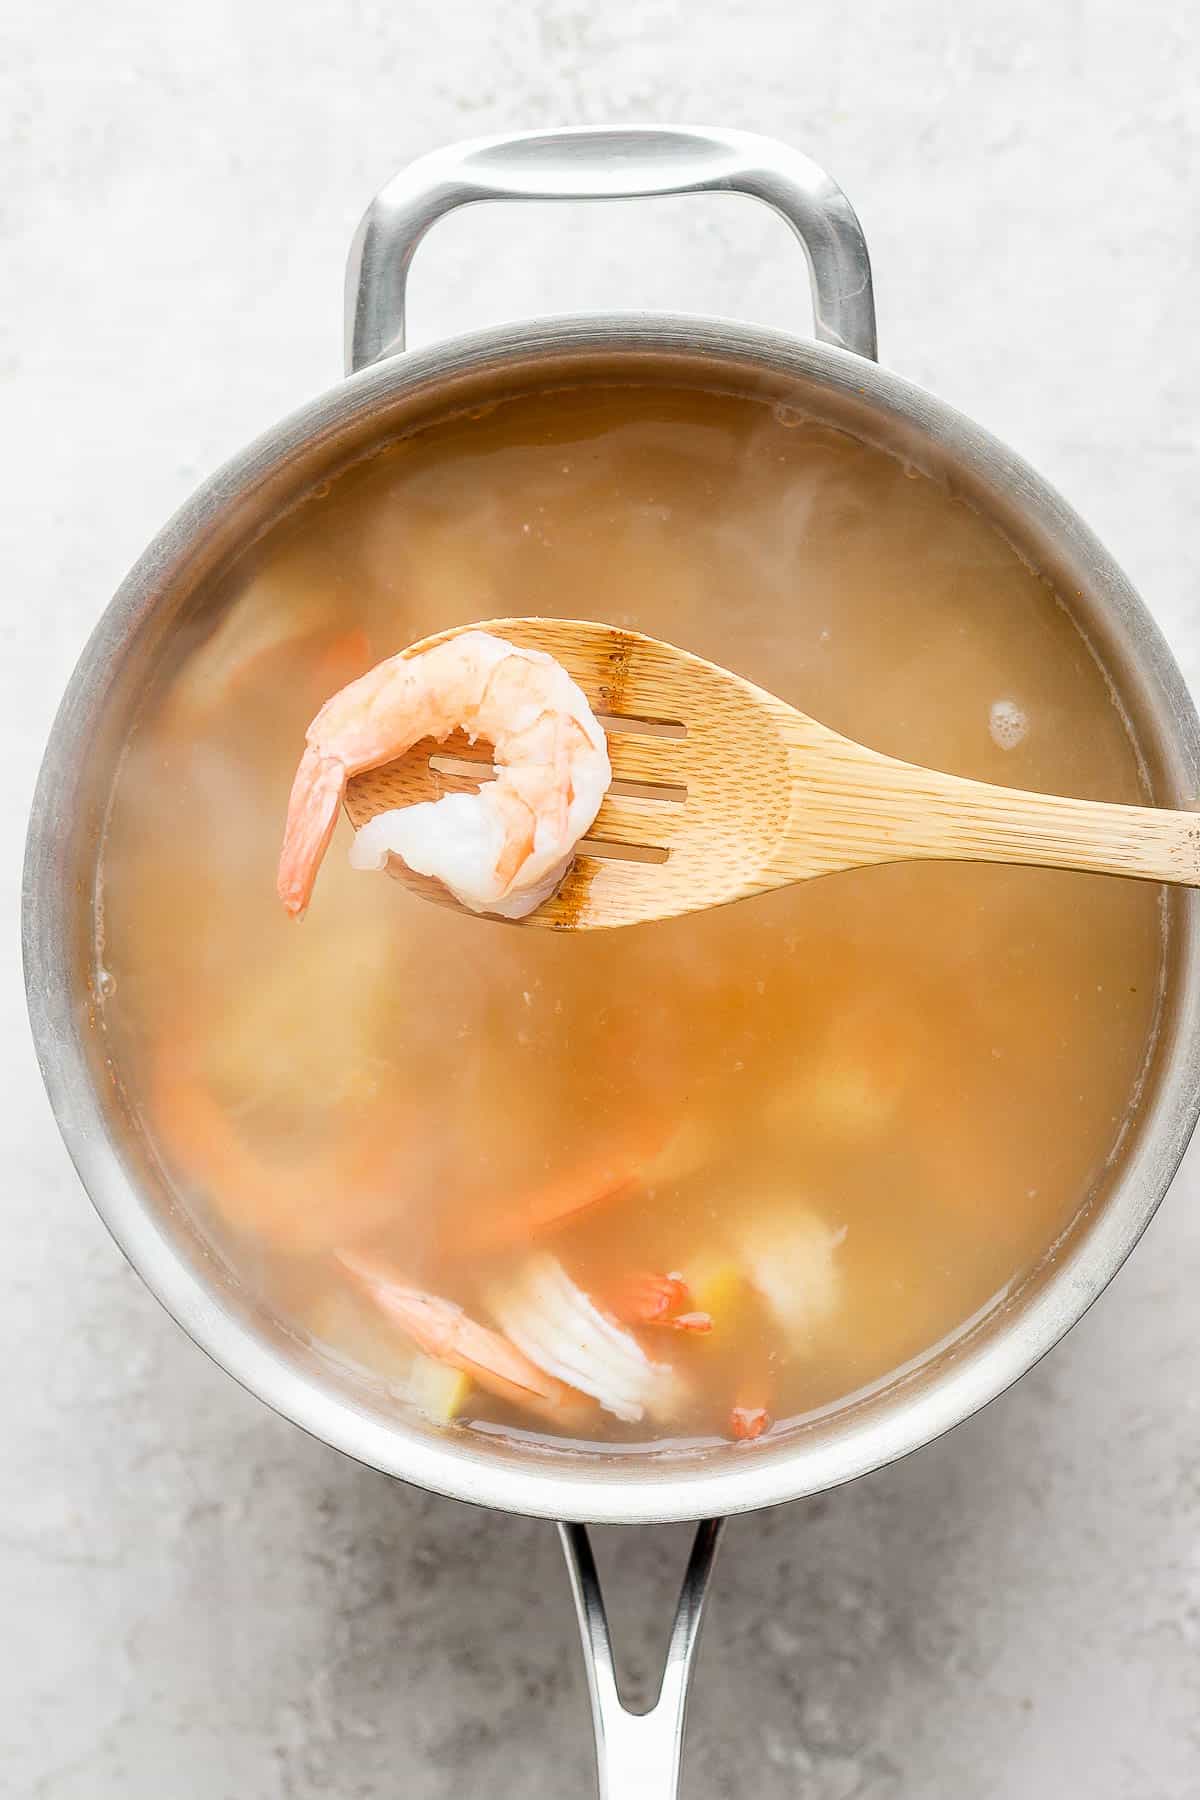 A fully cooked shrimp on a slotted wooden spoon hovering over the pot of seasoned water.